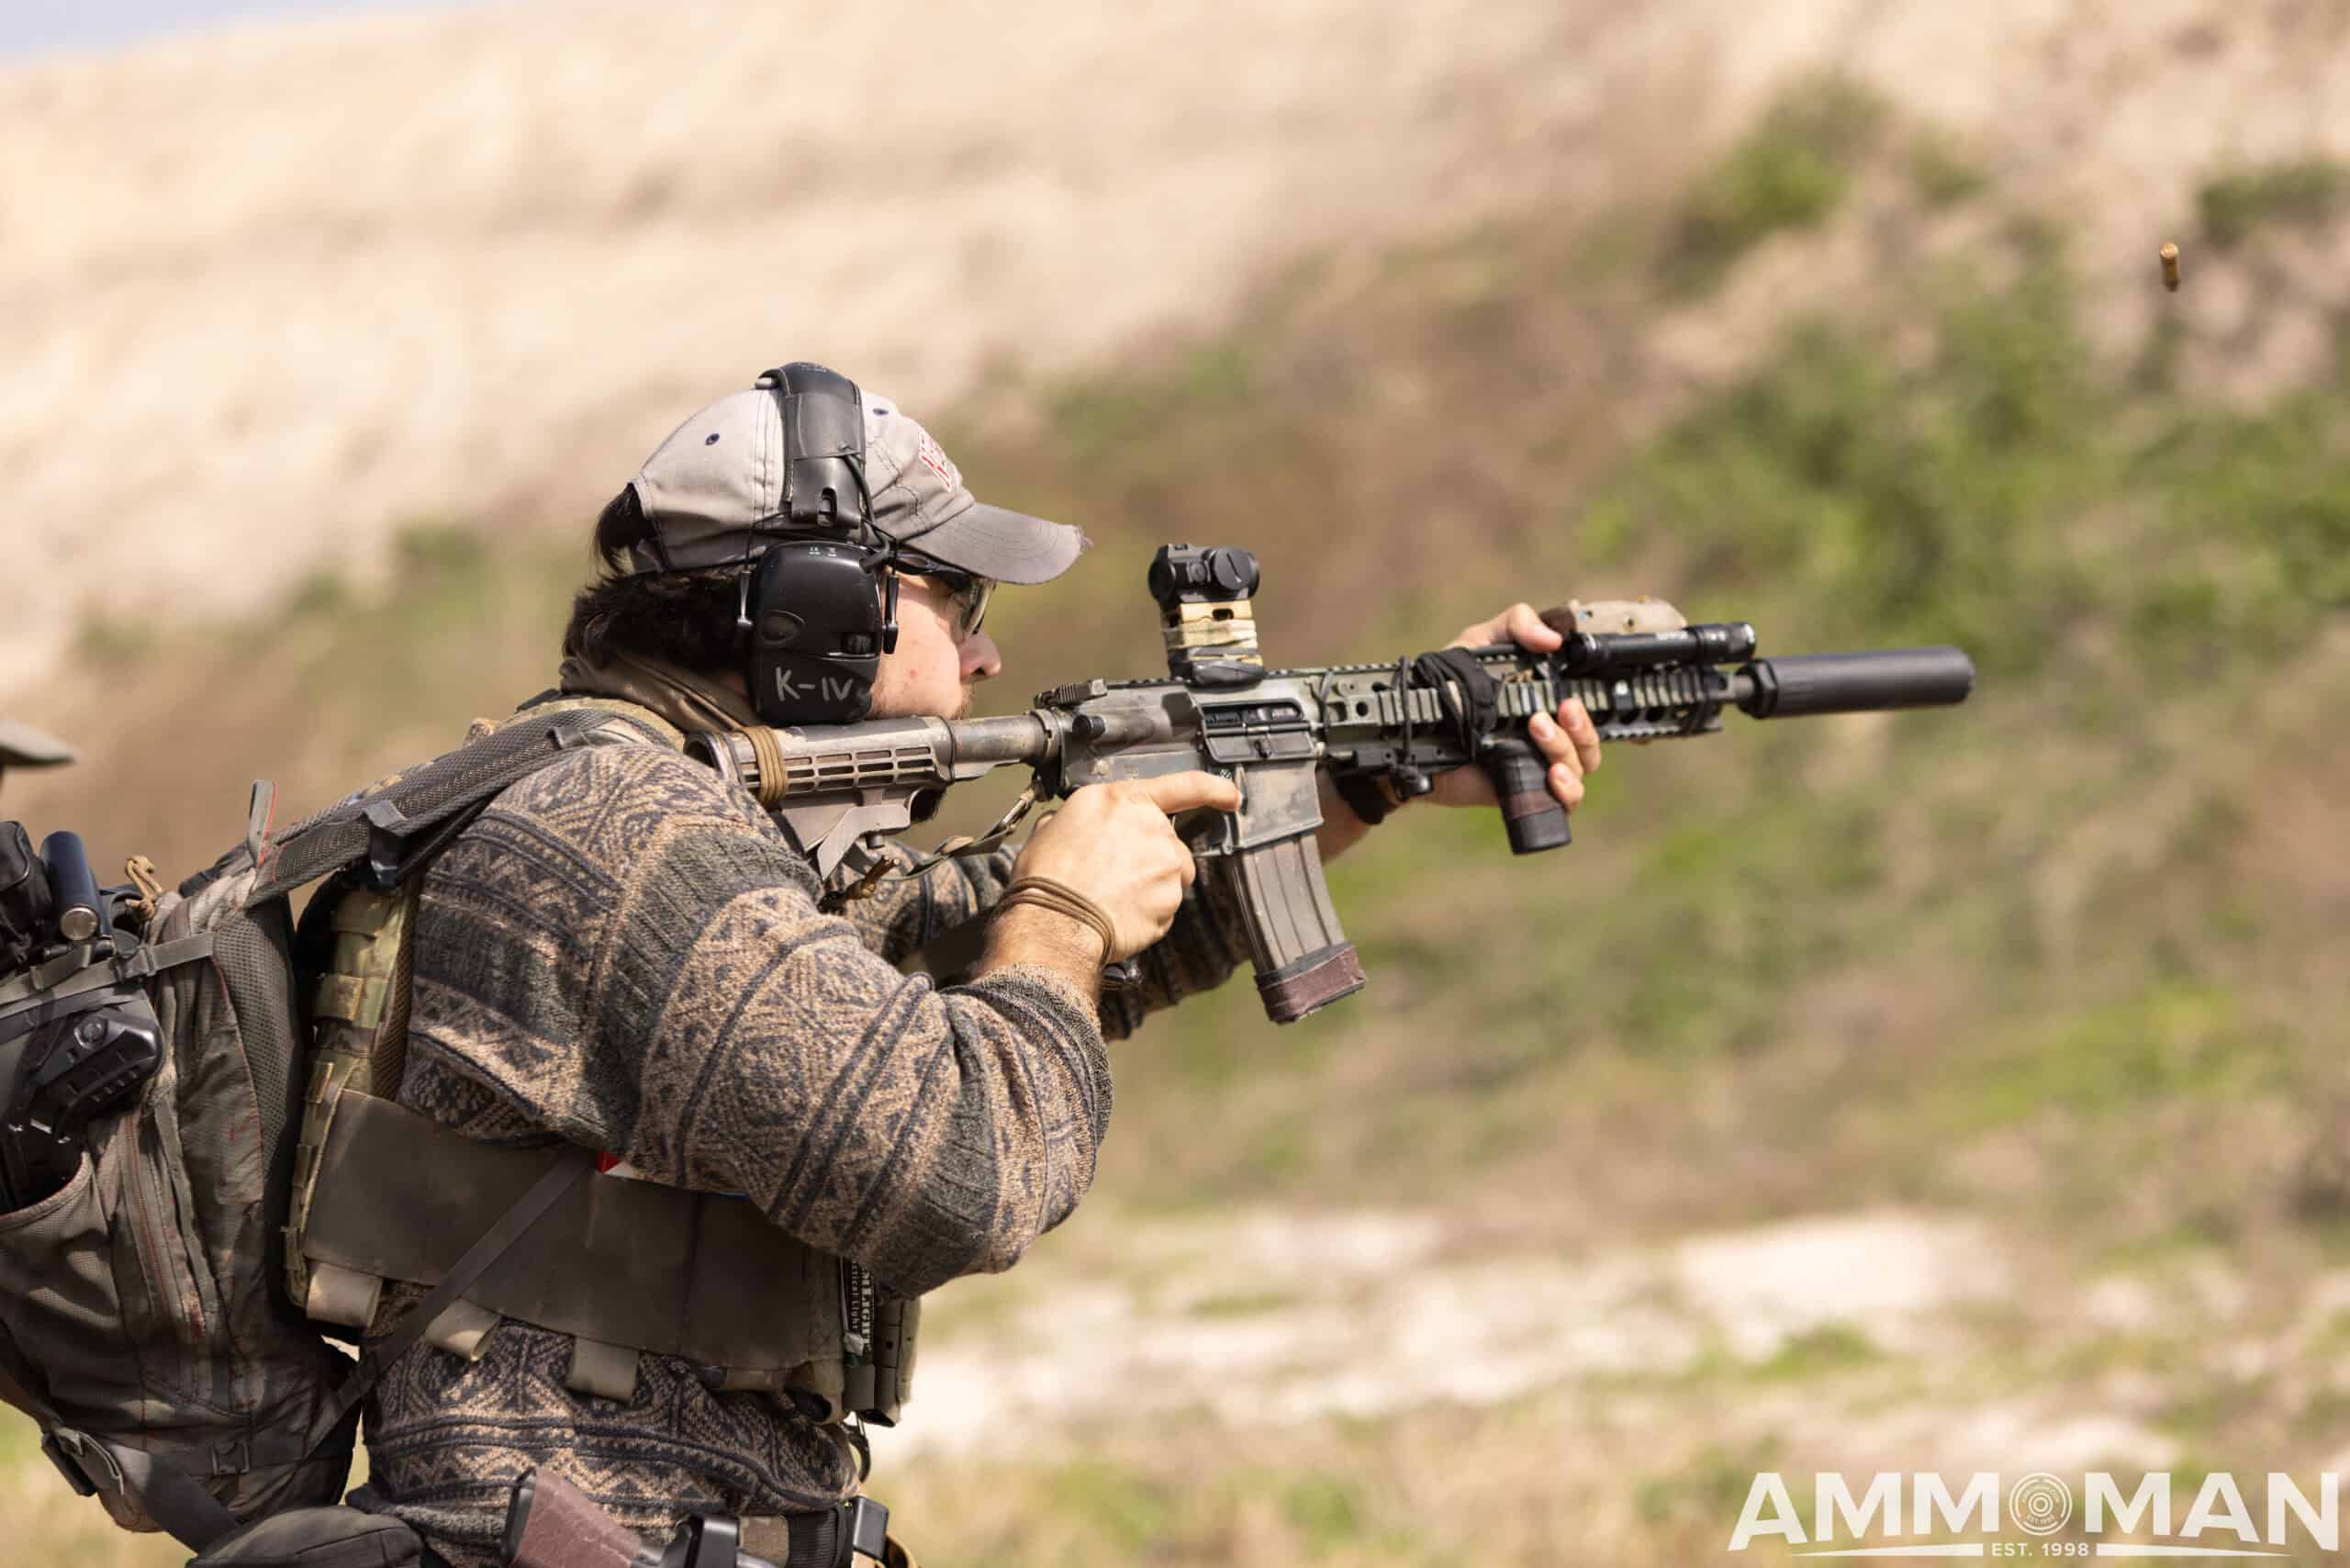 Shooting AR-15 with a suppressor